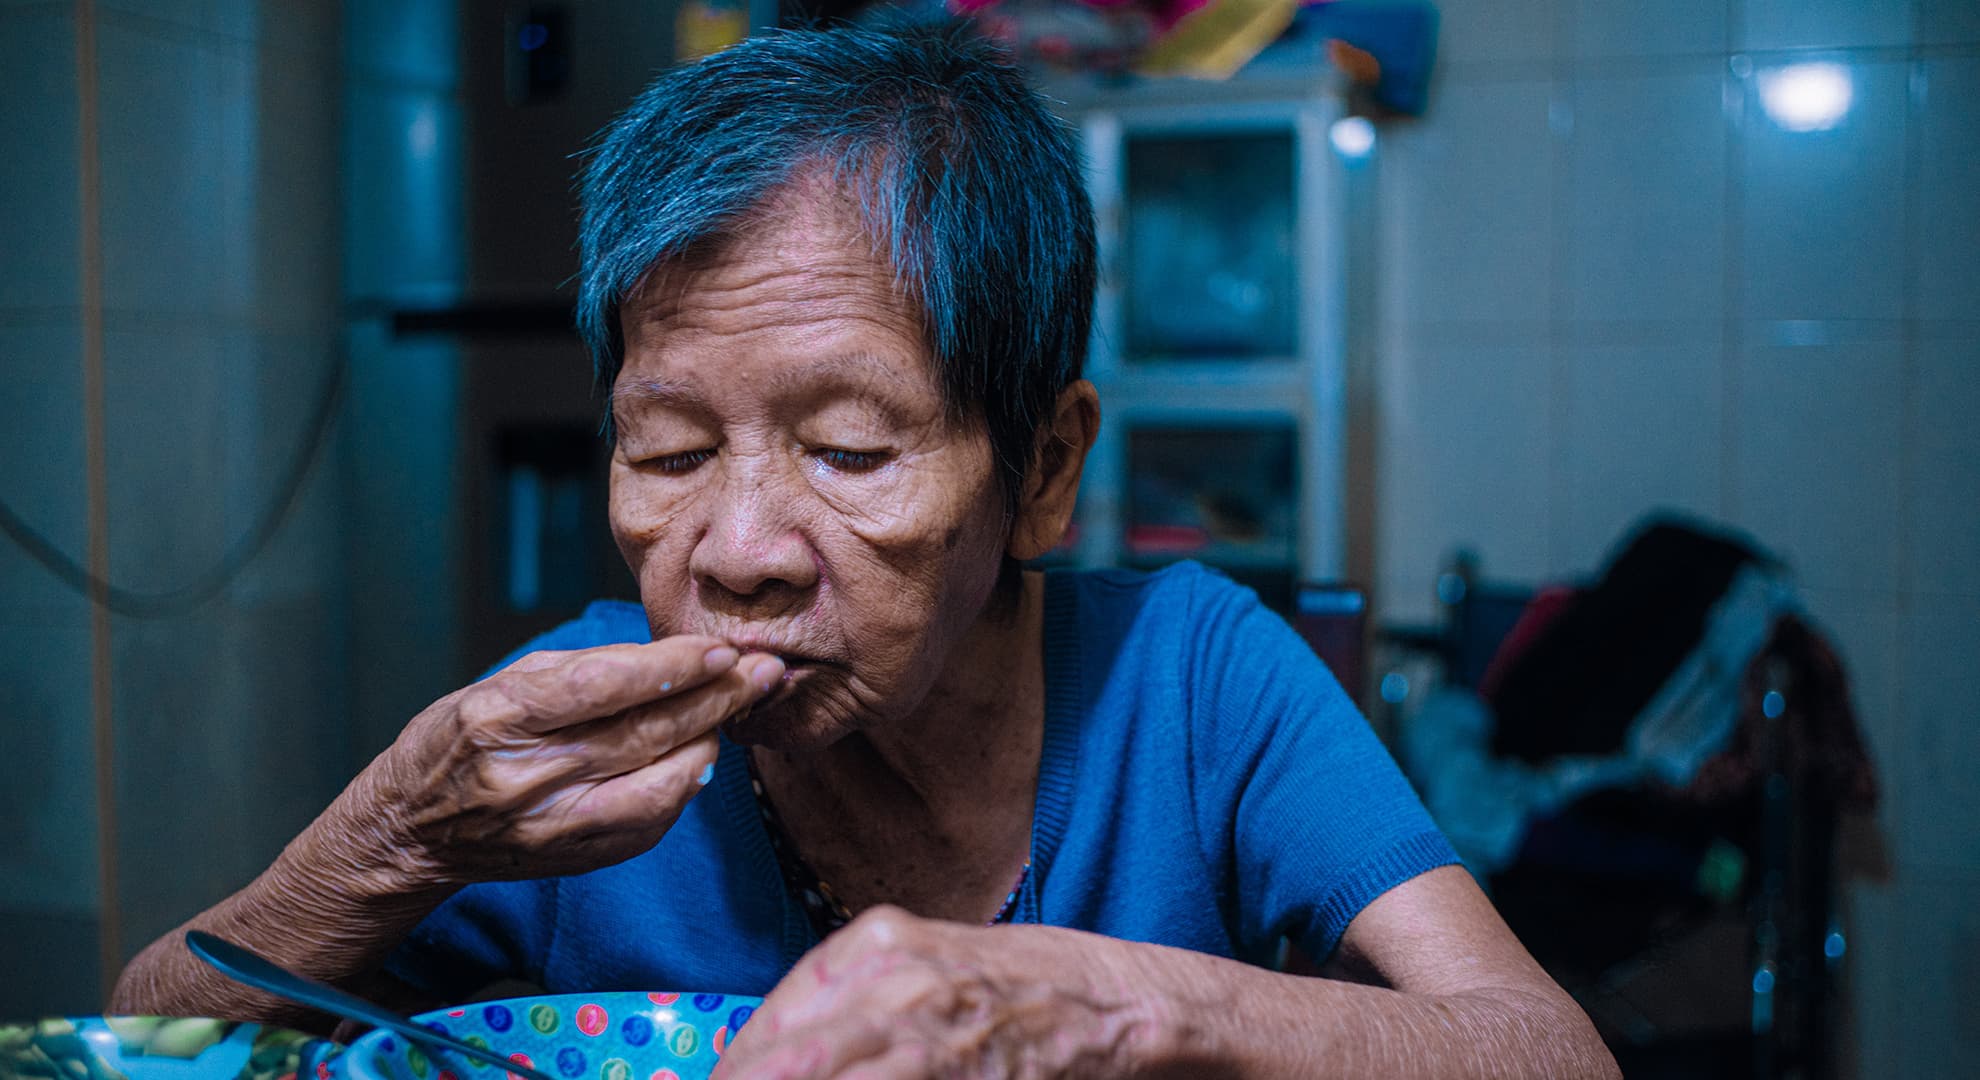 Old woman eating.